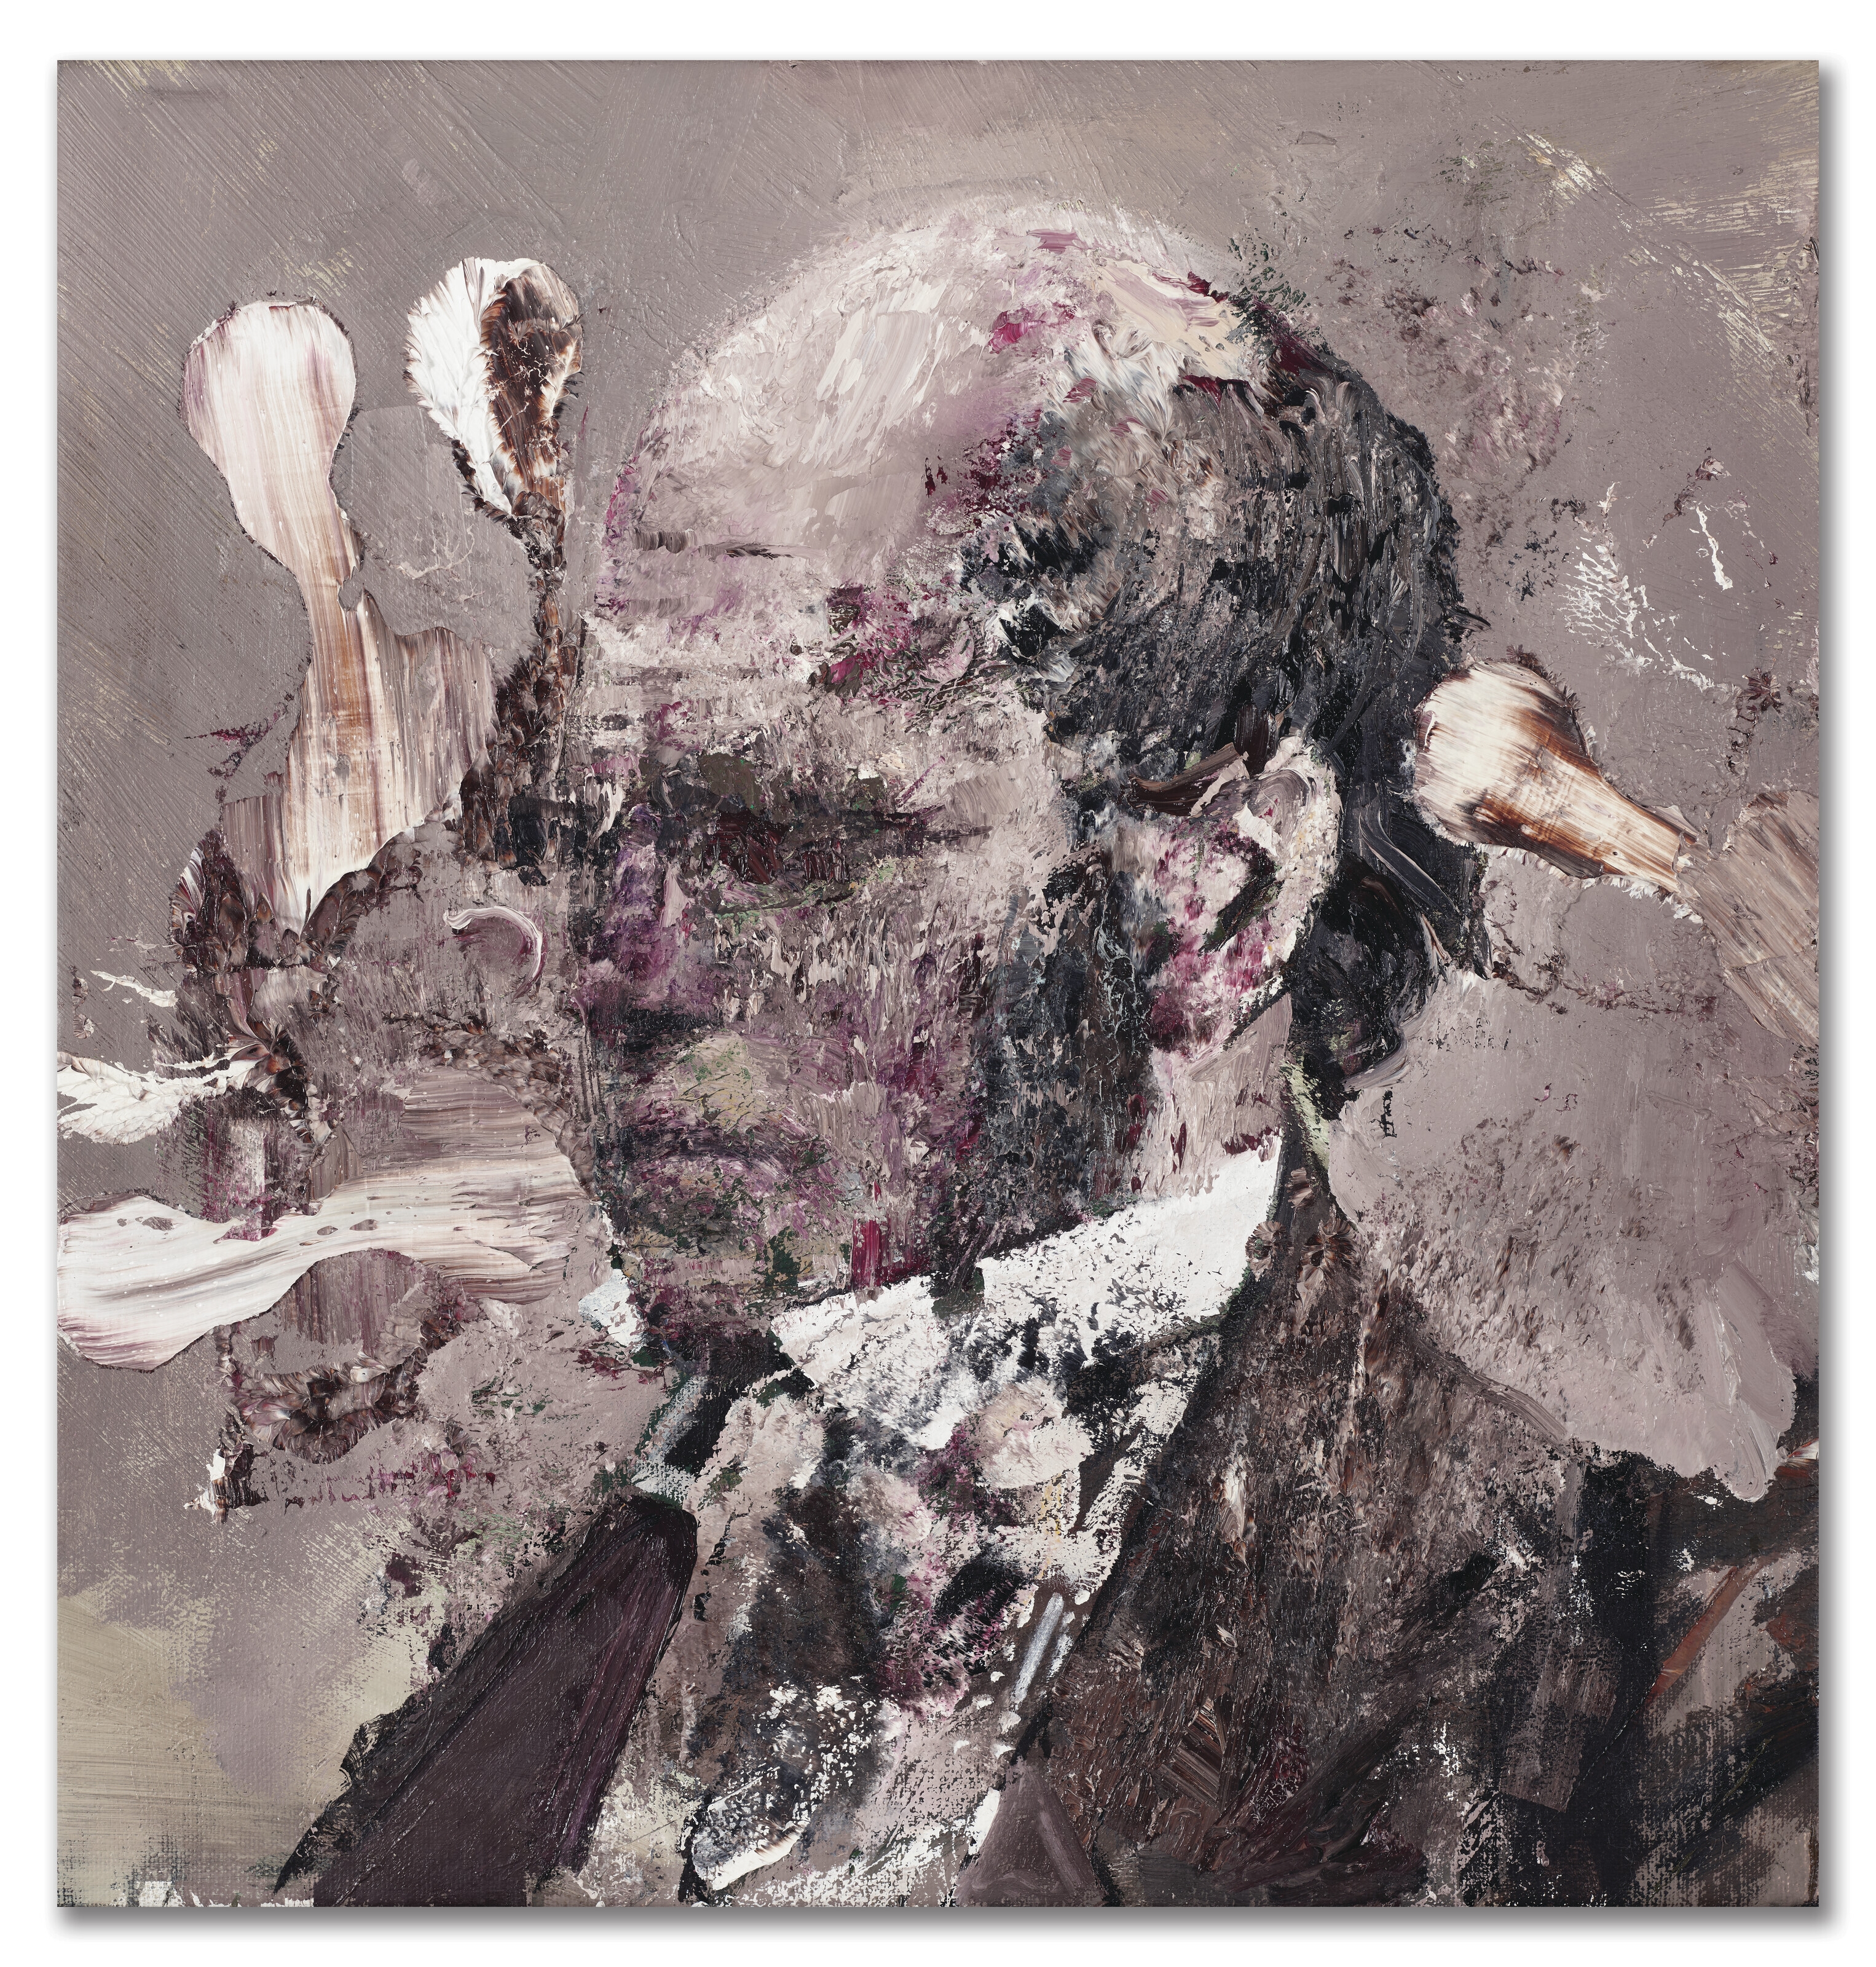 Charles Darwin as a Young Man by Adrian Ghenie, Painted in 2013